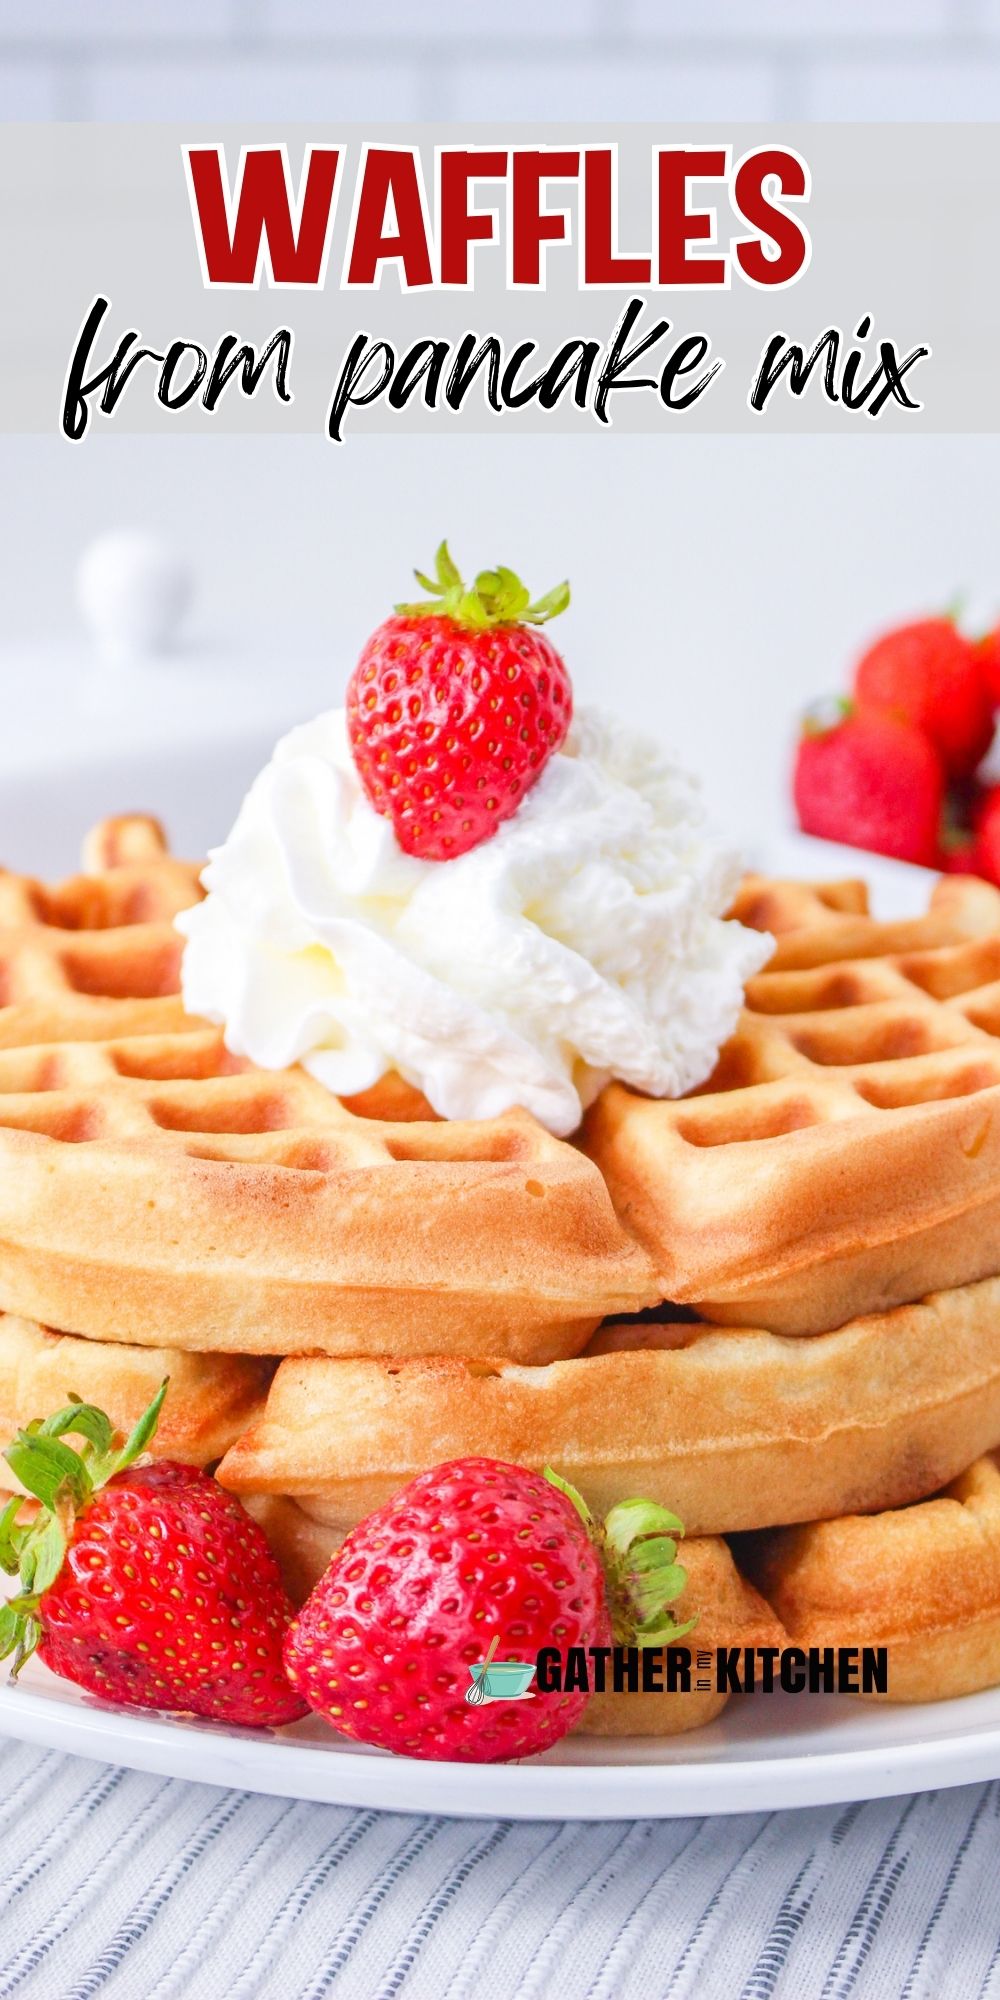 Pin image: top says "Waffles from Pancake Mix" and has a background of a plate of waffles with strawberries and cream.